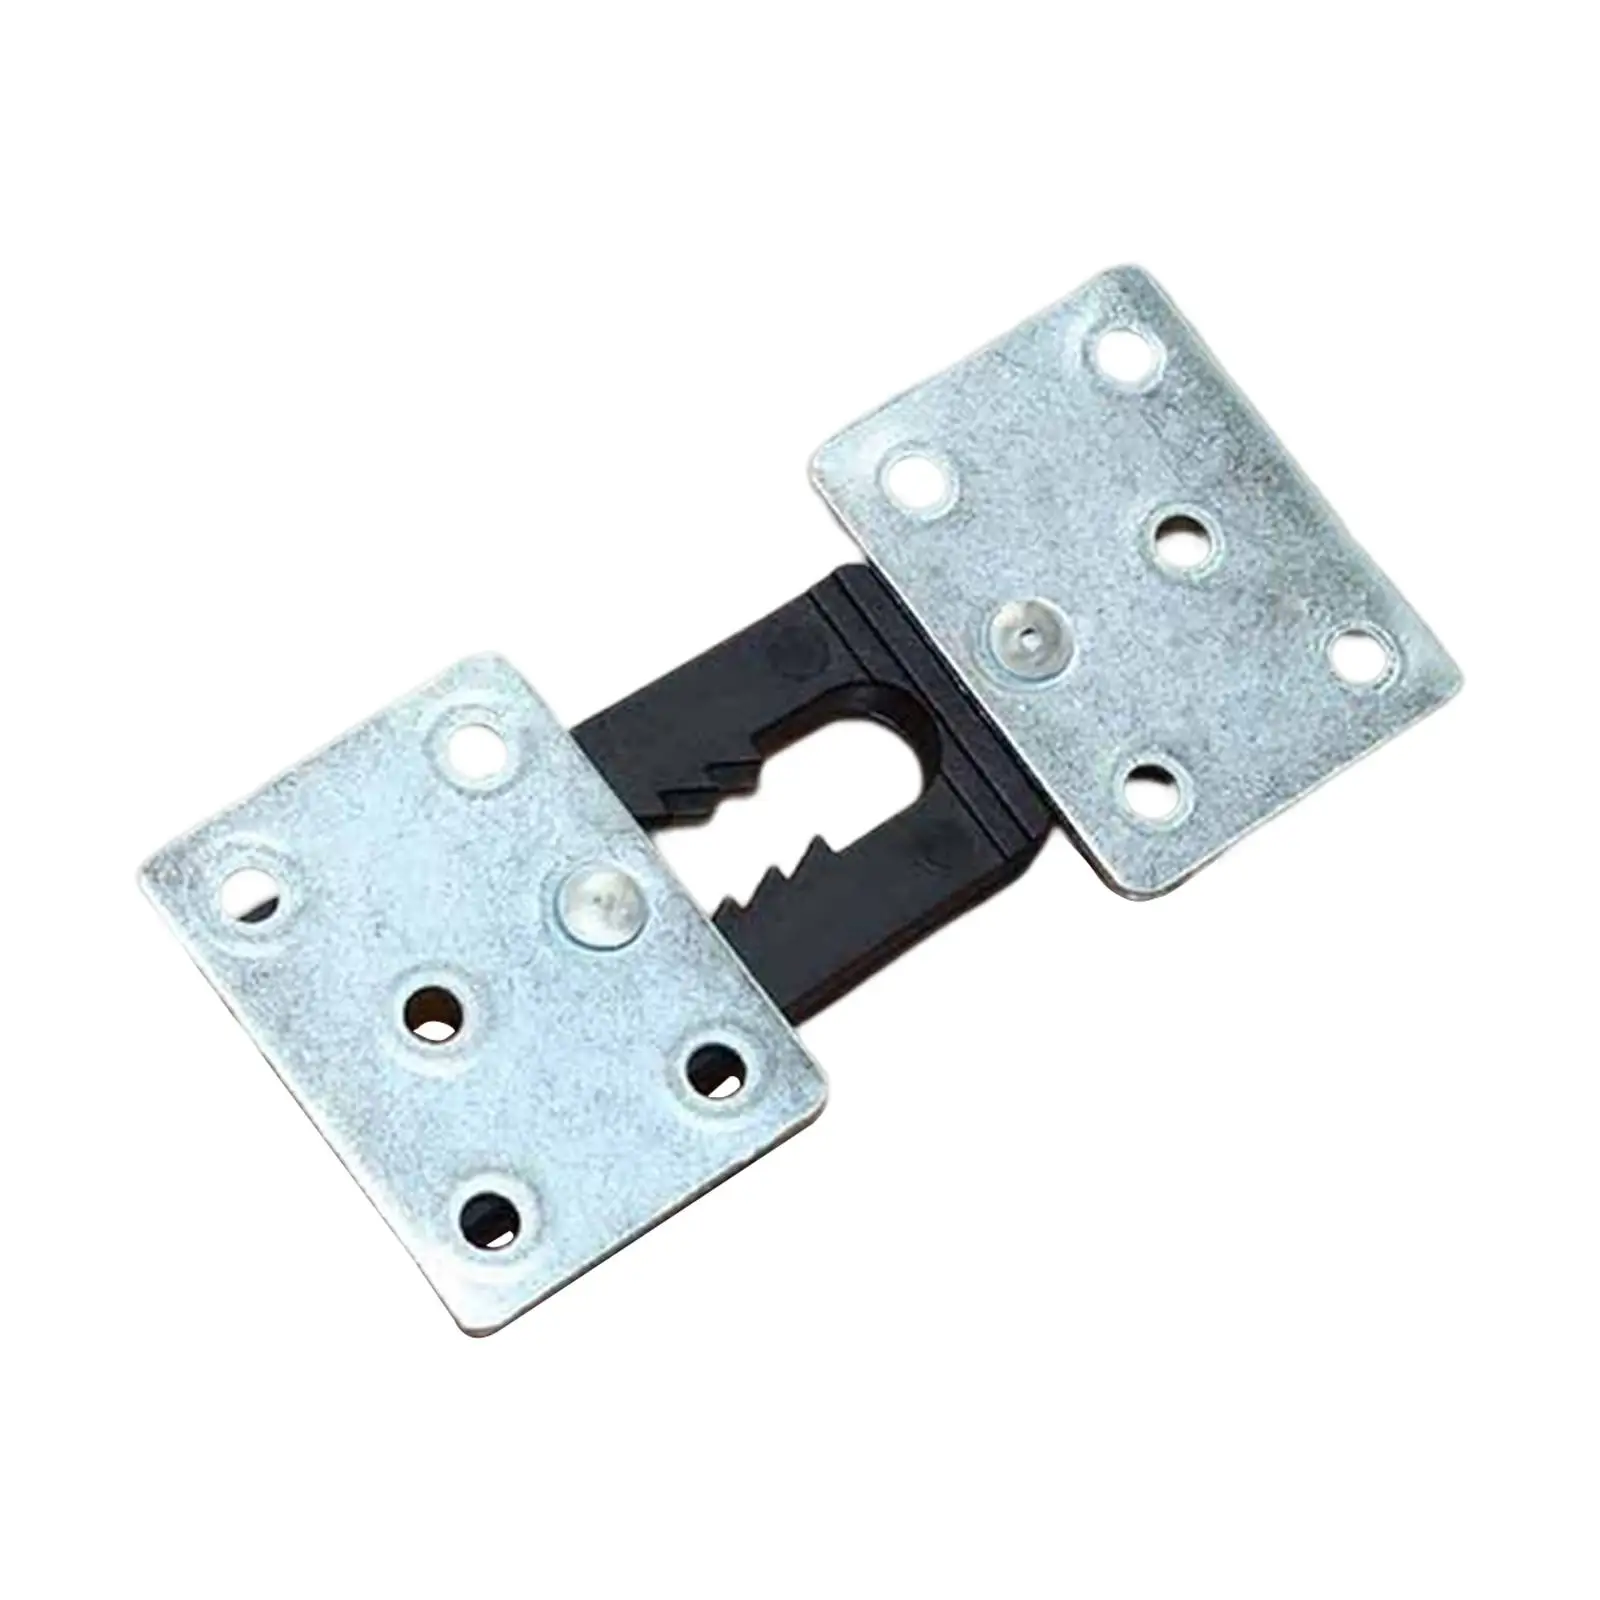 Furniture Connector Easy to Use Equipment Useful Detachable Sturdy Hardware Sofa Connector Screws Sectional Lock for Home Office